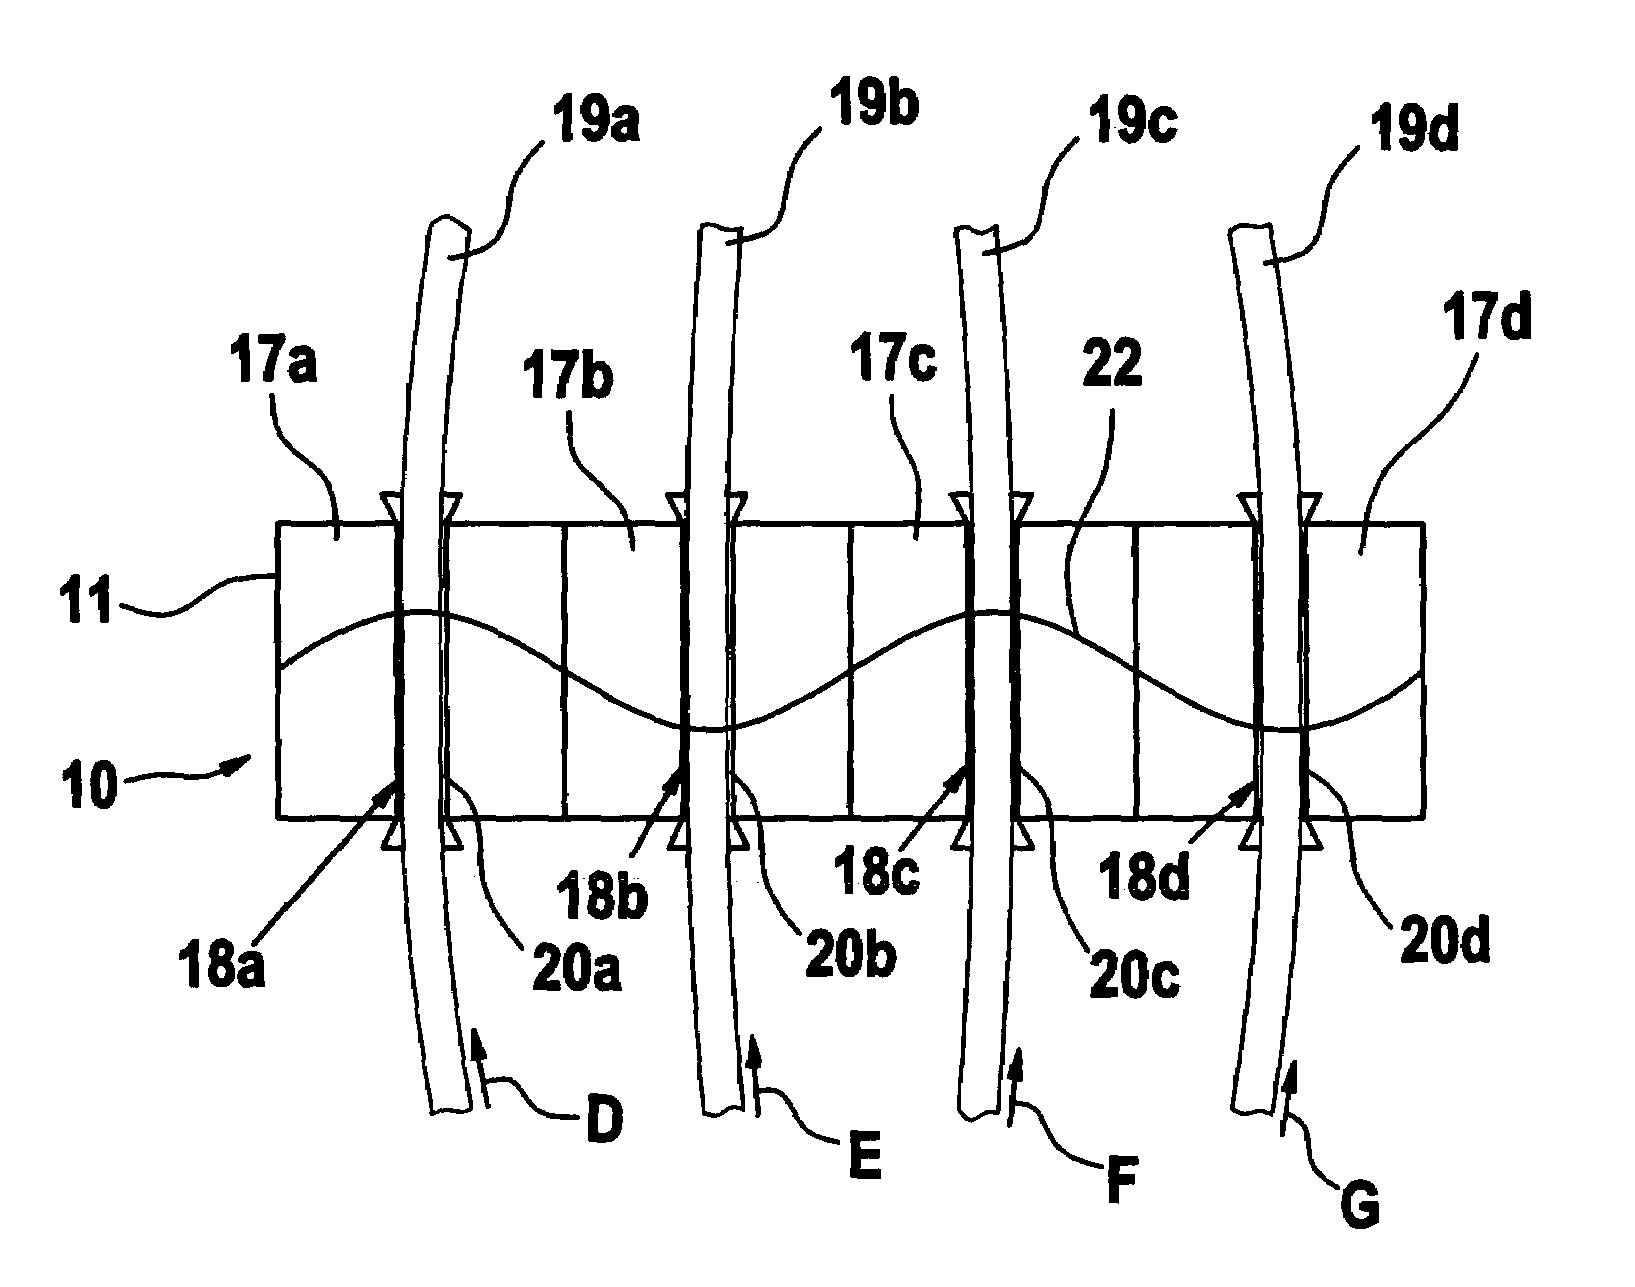 Microwave sensor for measuring a dielectric property of a product